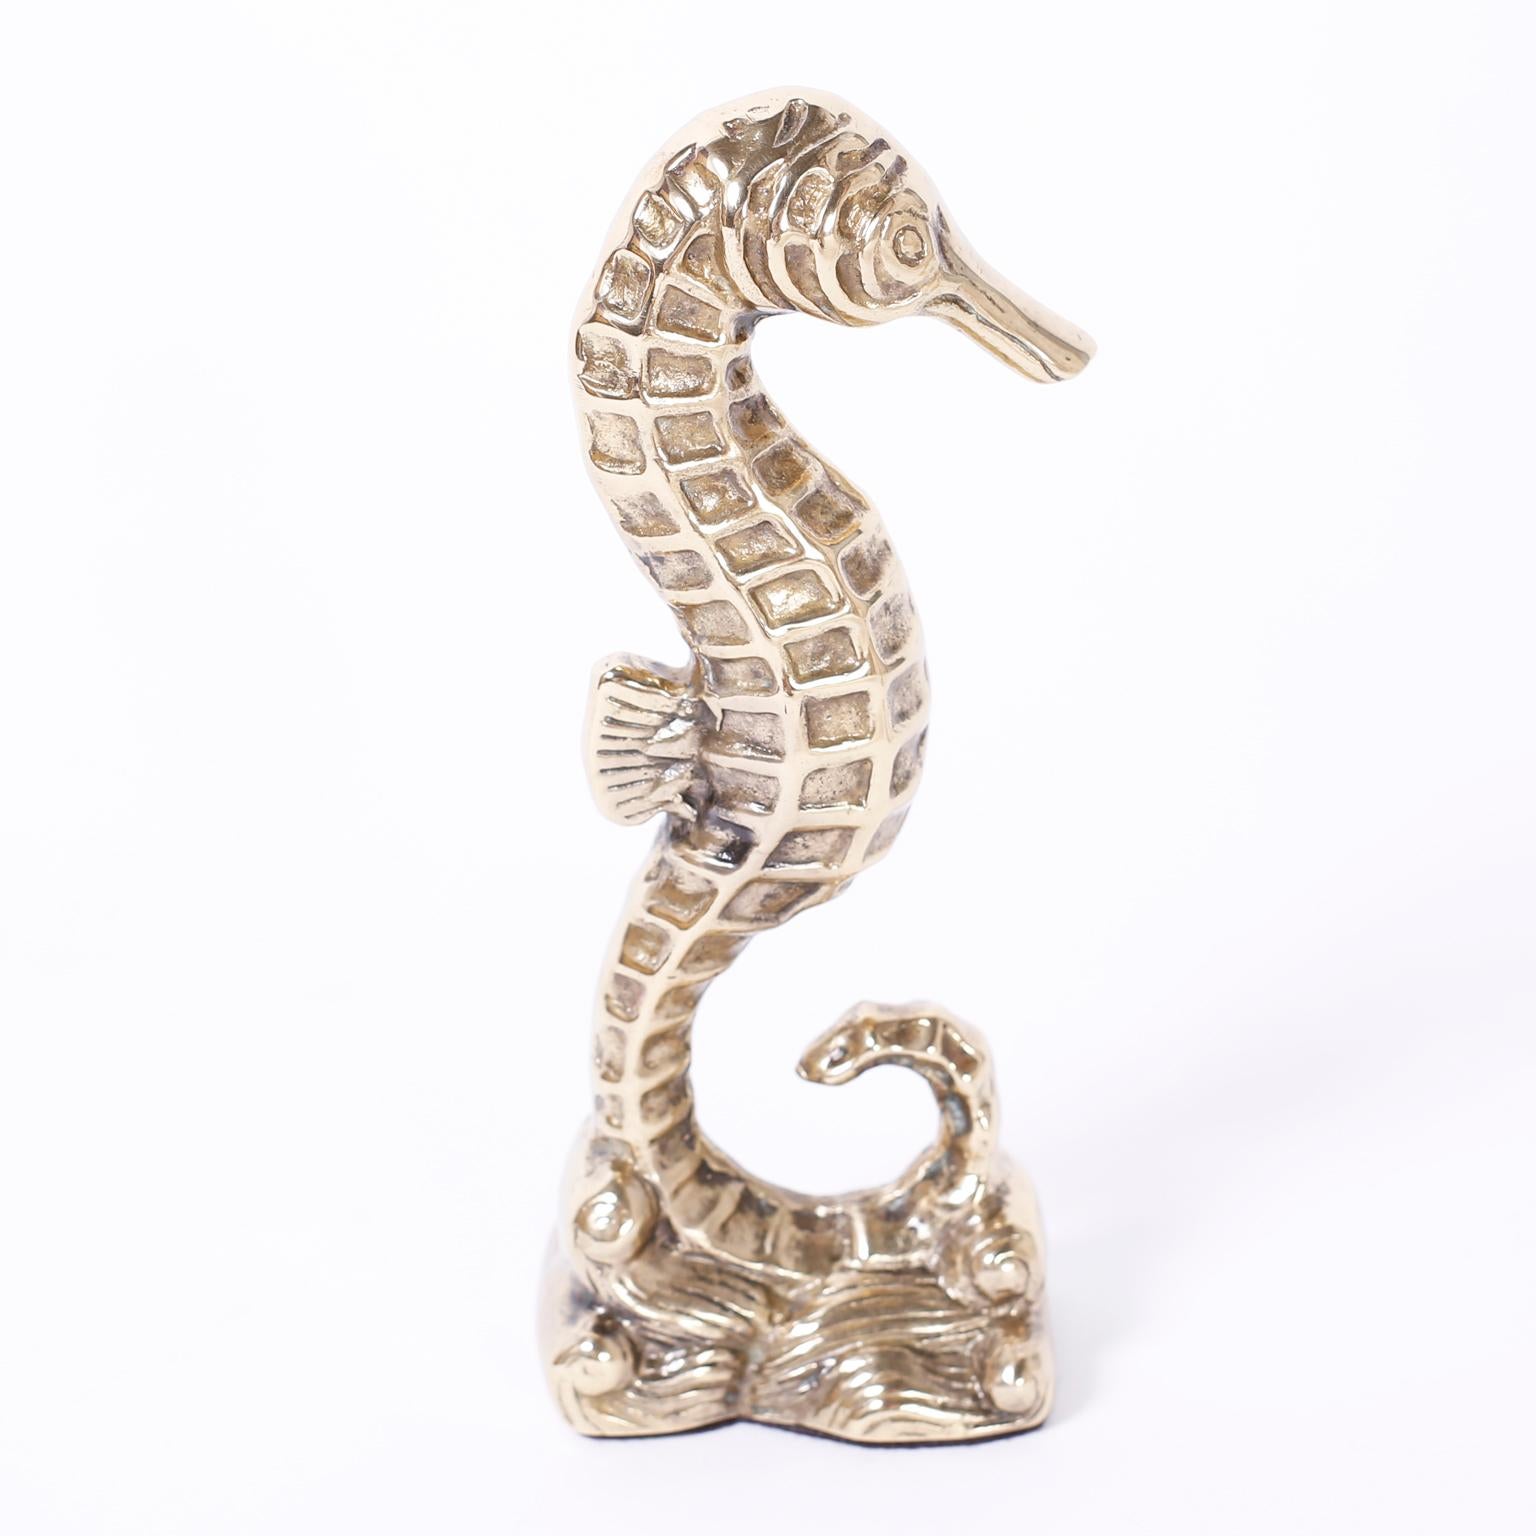 Cast Pair of Vintage Brass Seahorse Bookends